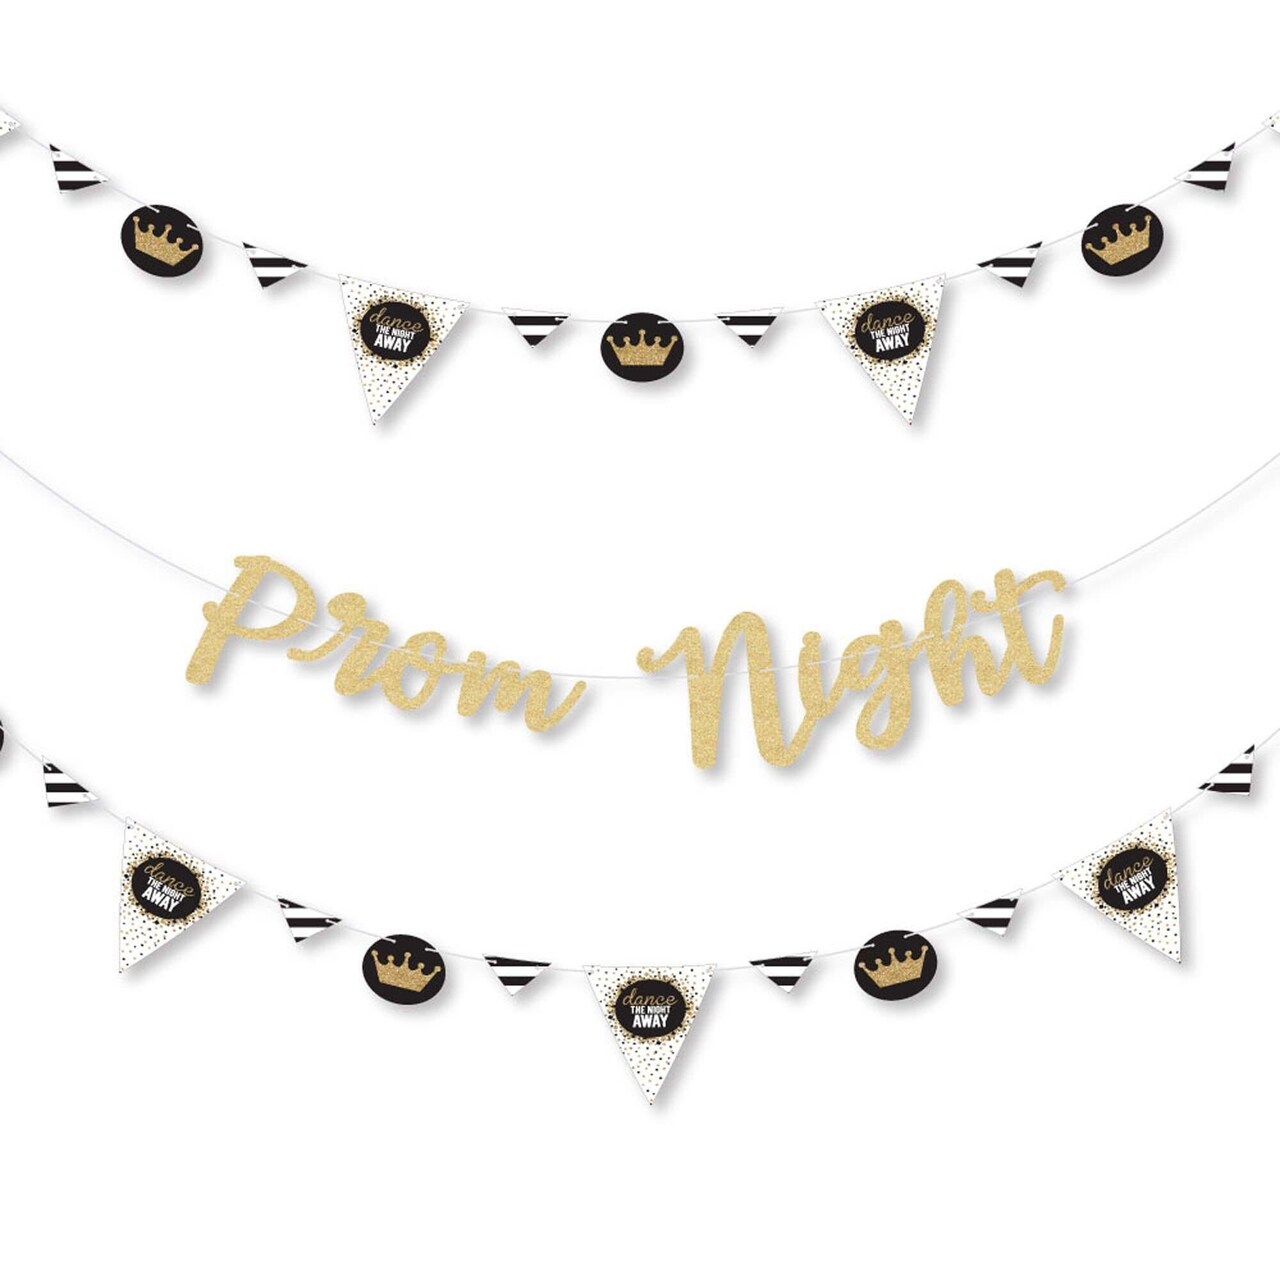 Big Dot of Happiness Prom - Prom Night Party Letter Banner Decoration - 36 Banner Cutouts and No-Mess Real Gold Glitter Prom Night Banner Letters